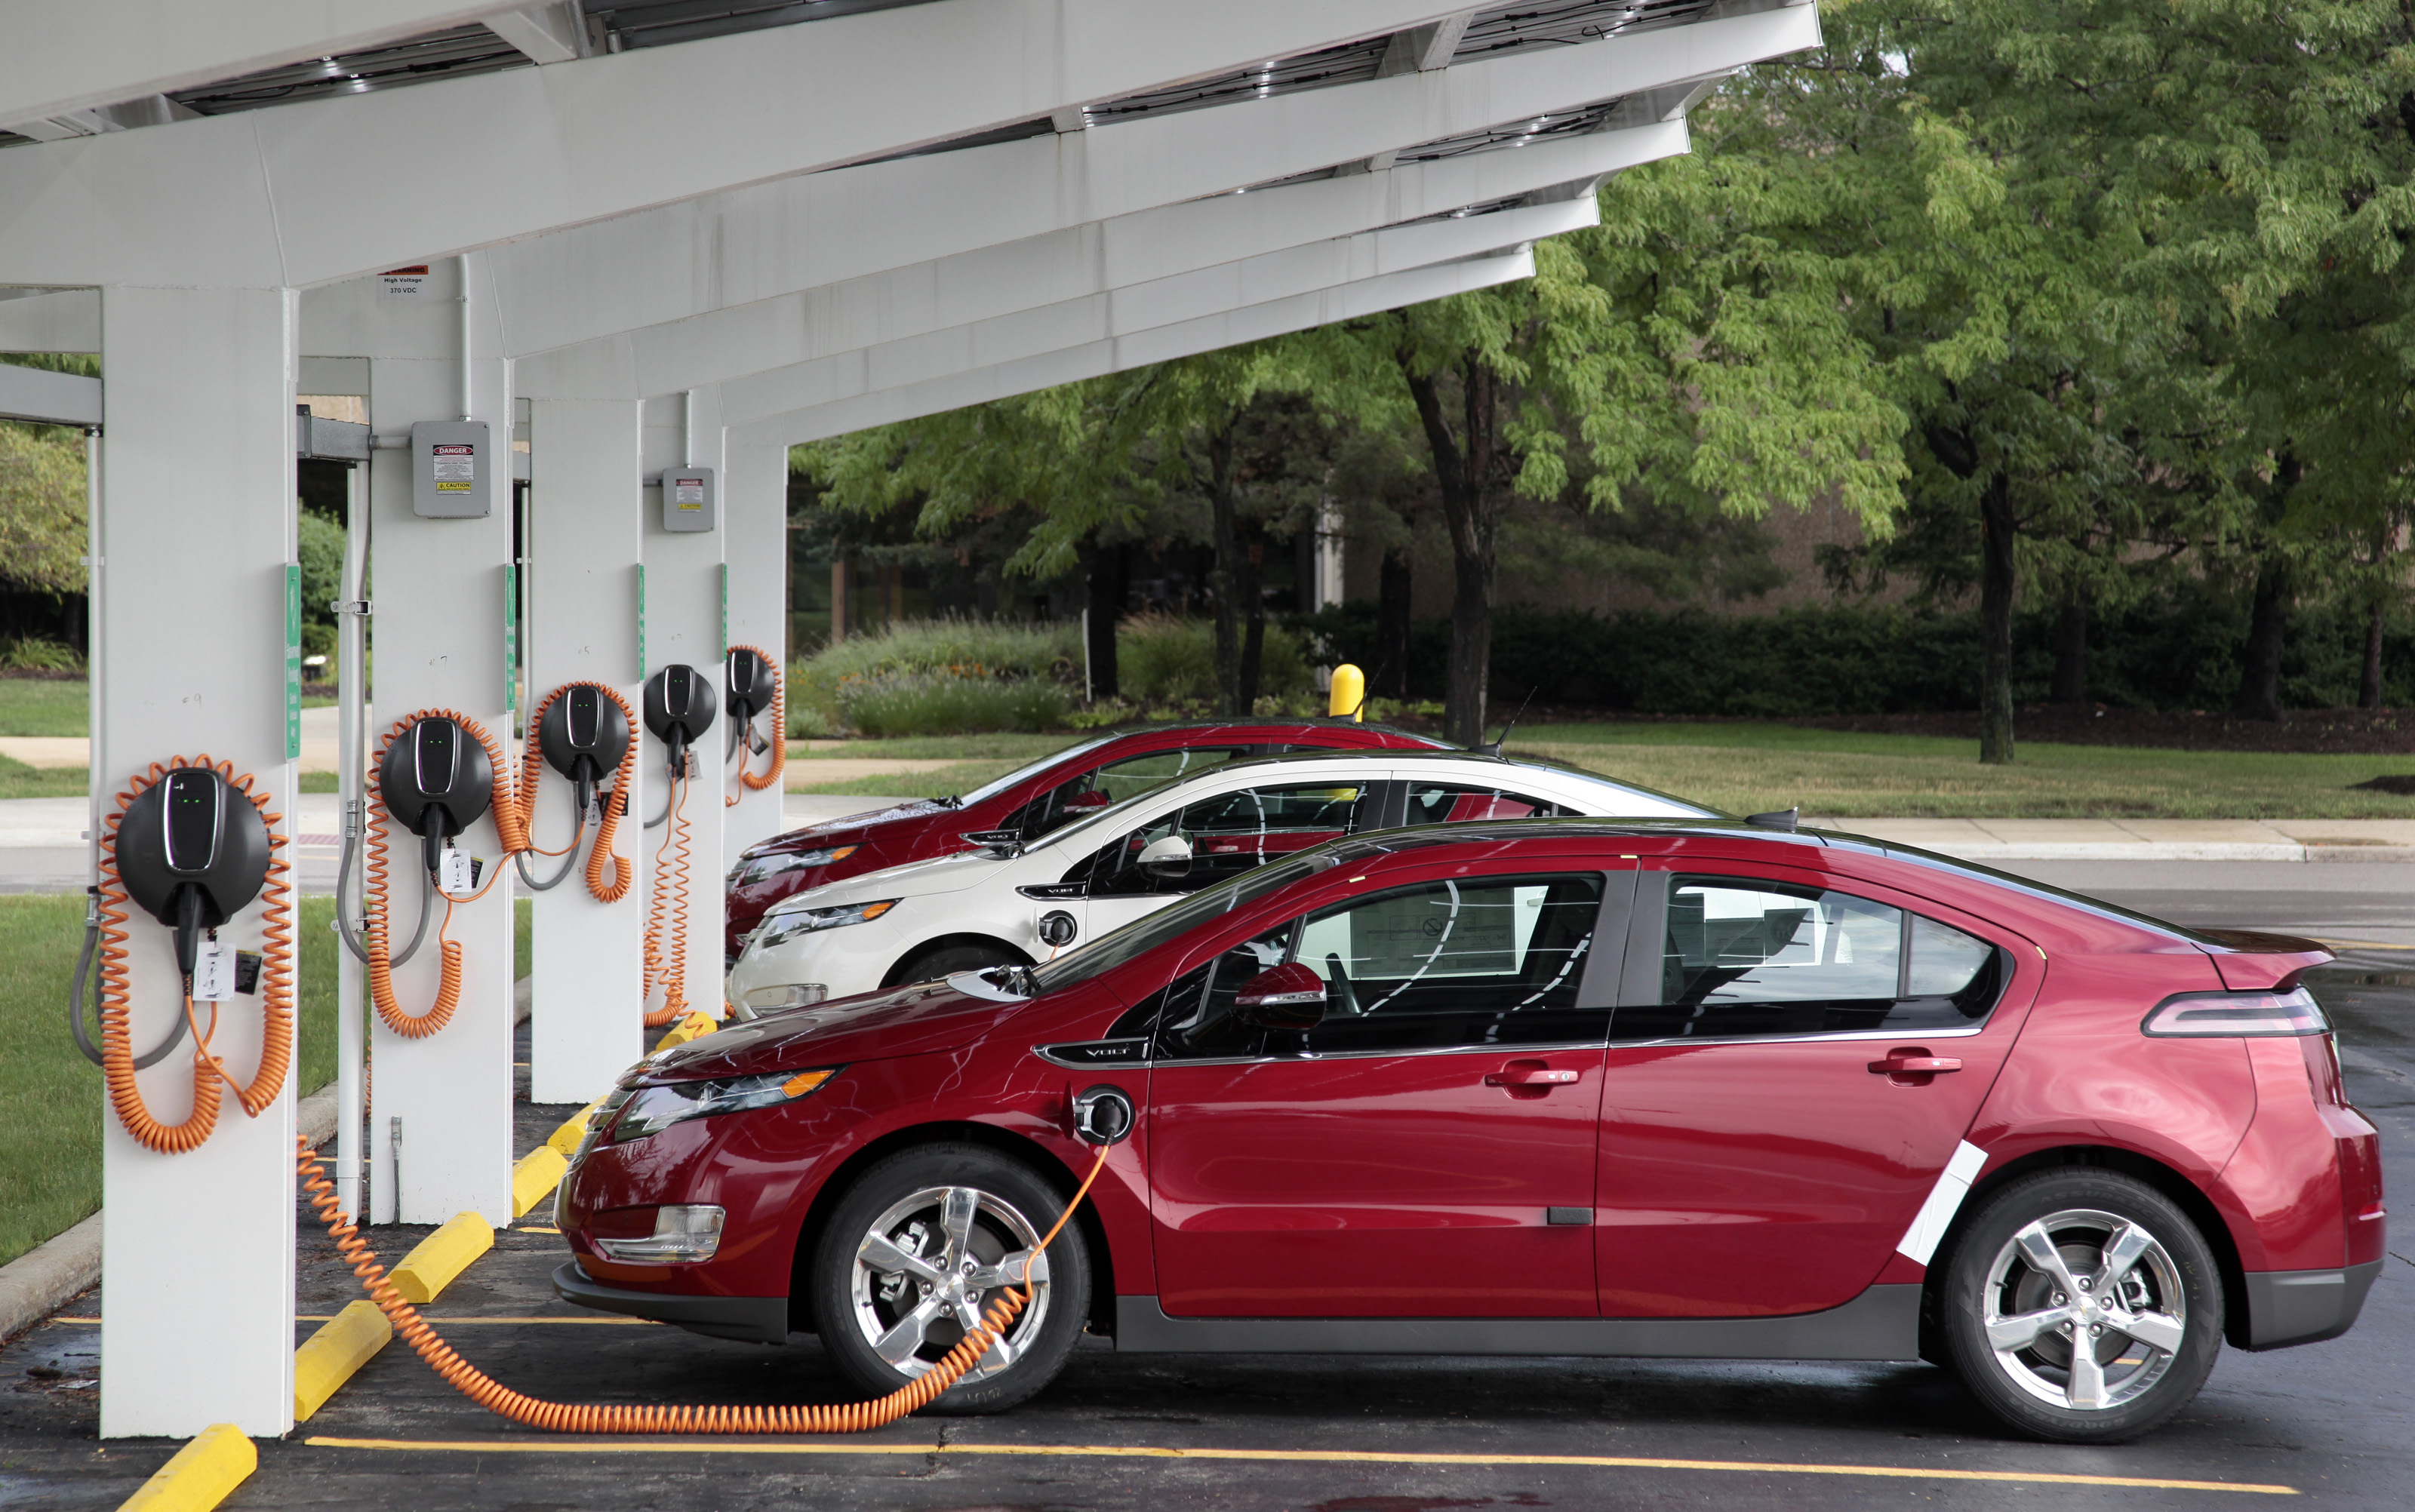 Chevrolet Volt electric vehicles are parked at solarpowered electric